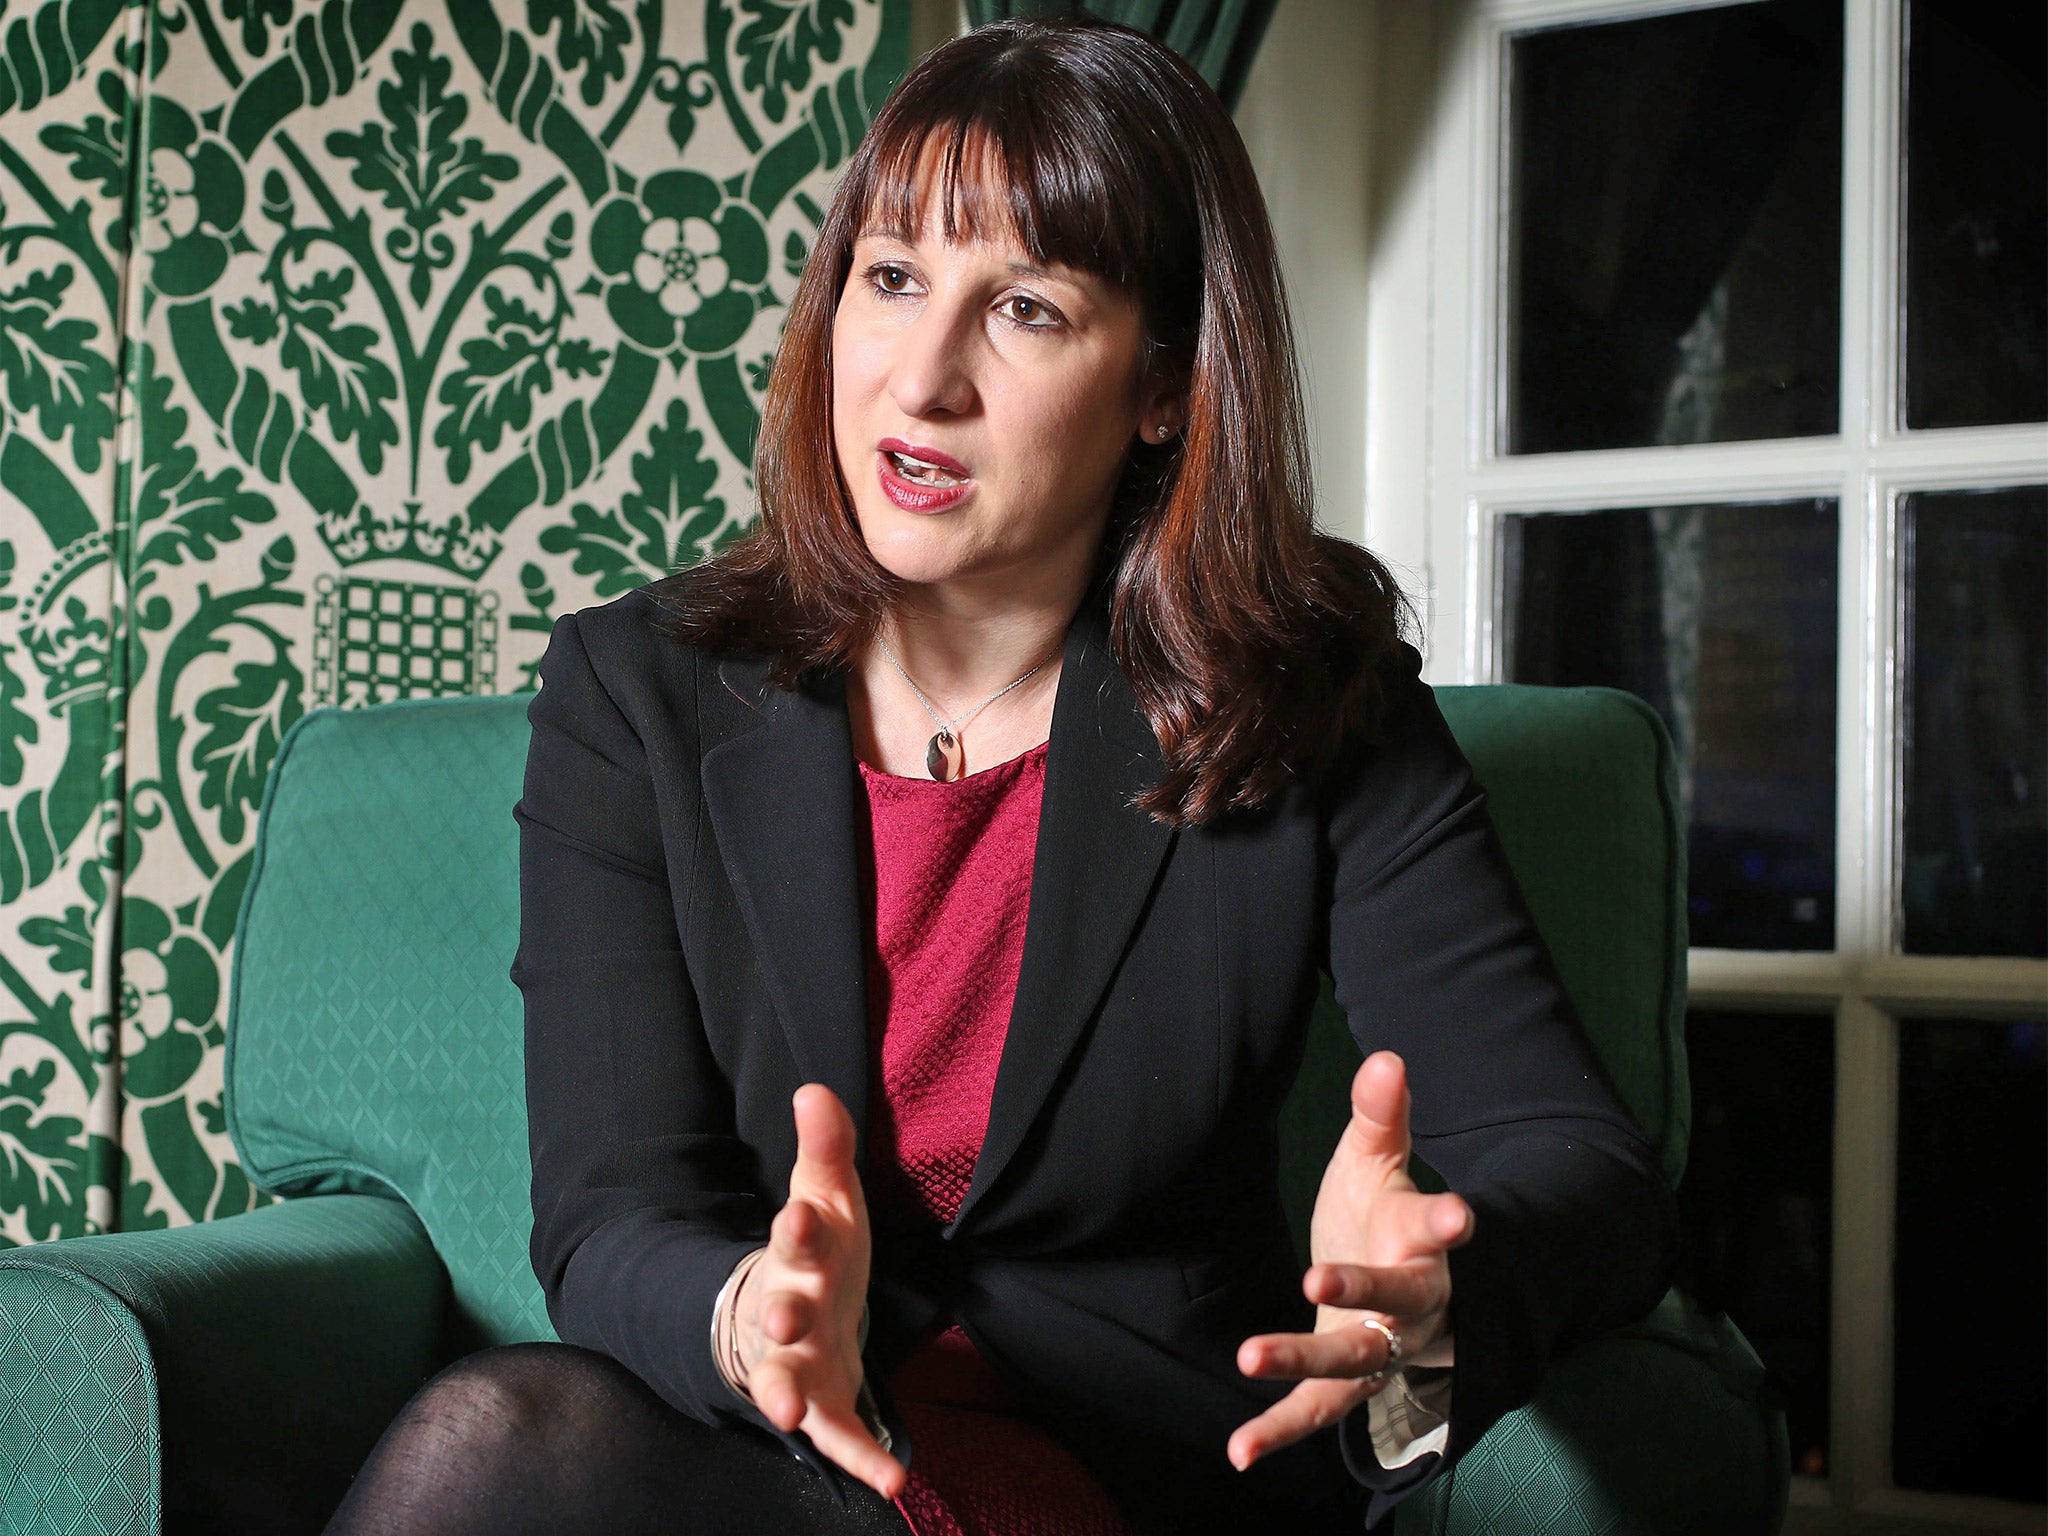 Rachel Reeves has claimed that lower wage jobs are costing taxpayers an extra £900m in tax credits alone